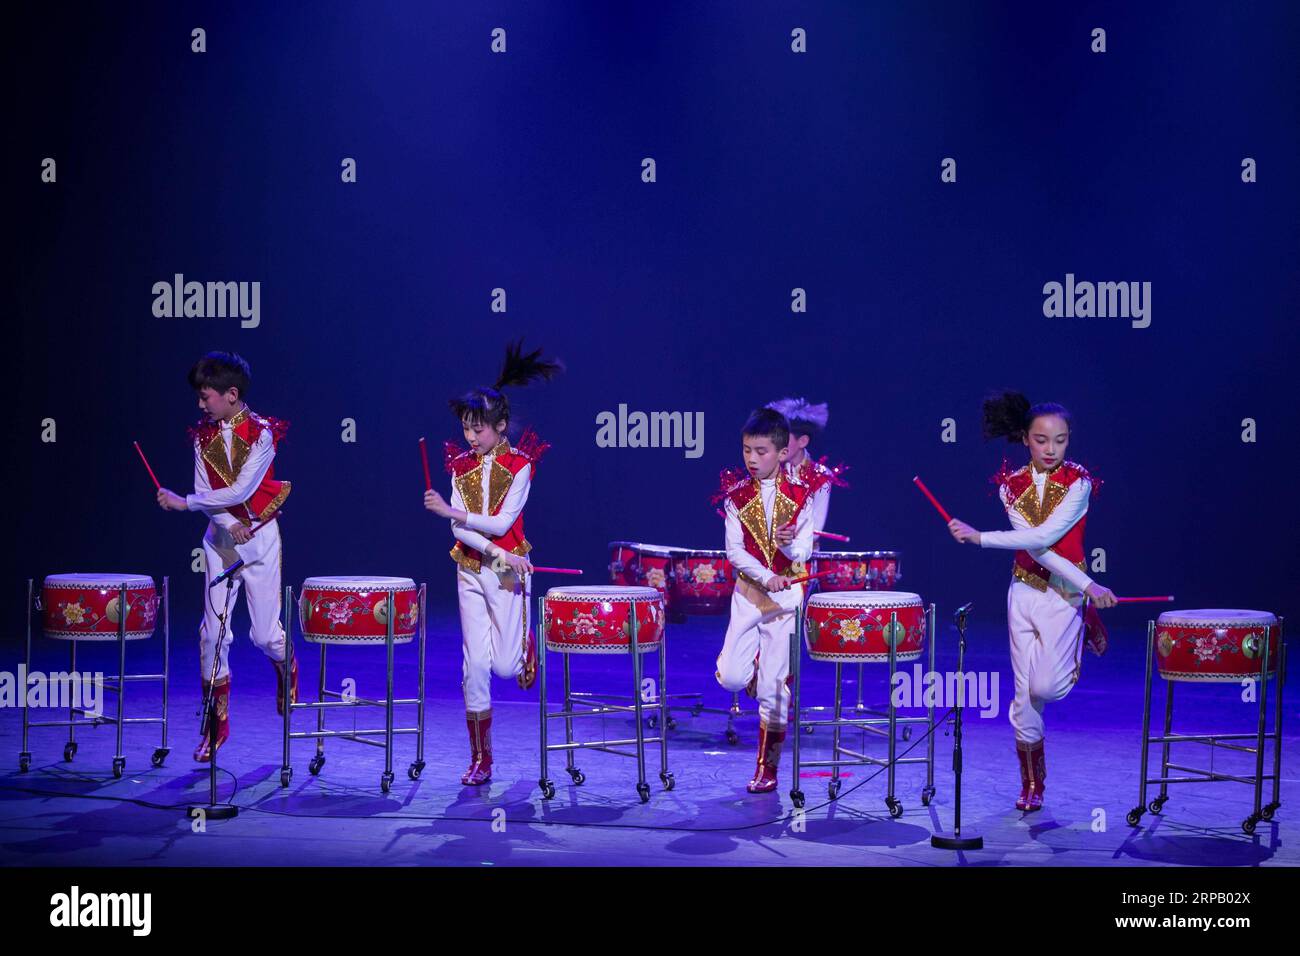 (190523) -- HELSINKI, May 23, 2019 (Xinhua) -- Children from the Nanjing Little Red Flower Art Troupe of China perform at the Alexander Theatre in Helsinki, Finland, May 21, 2019. (Xinhua/Matti Matikainen) FINLAND-HELSINKI-ART TROUPE-PERFORMANCE PUBLICATIONxNOTxINxCHN Stock Photo